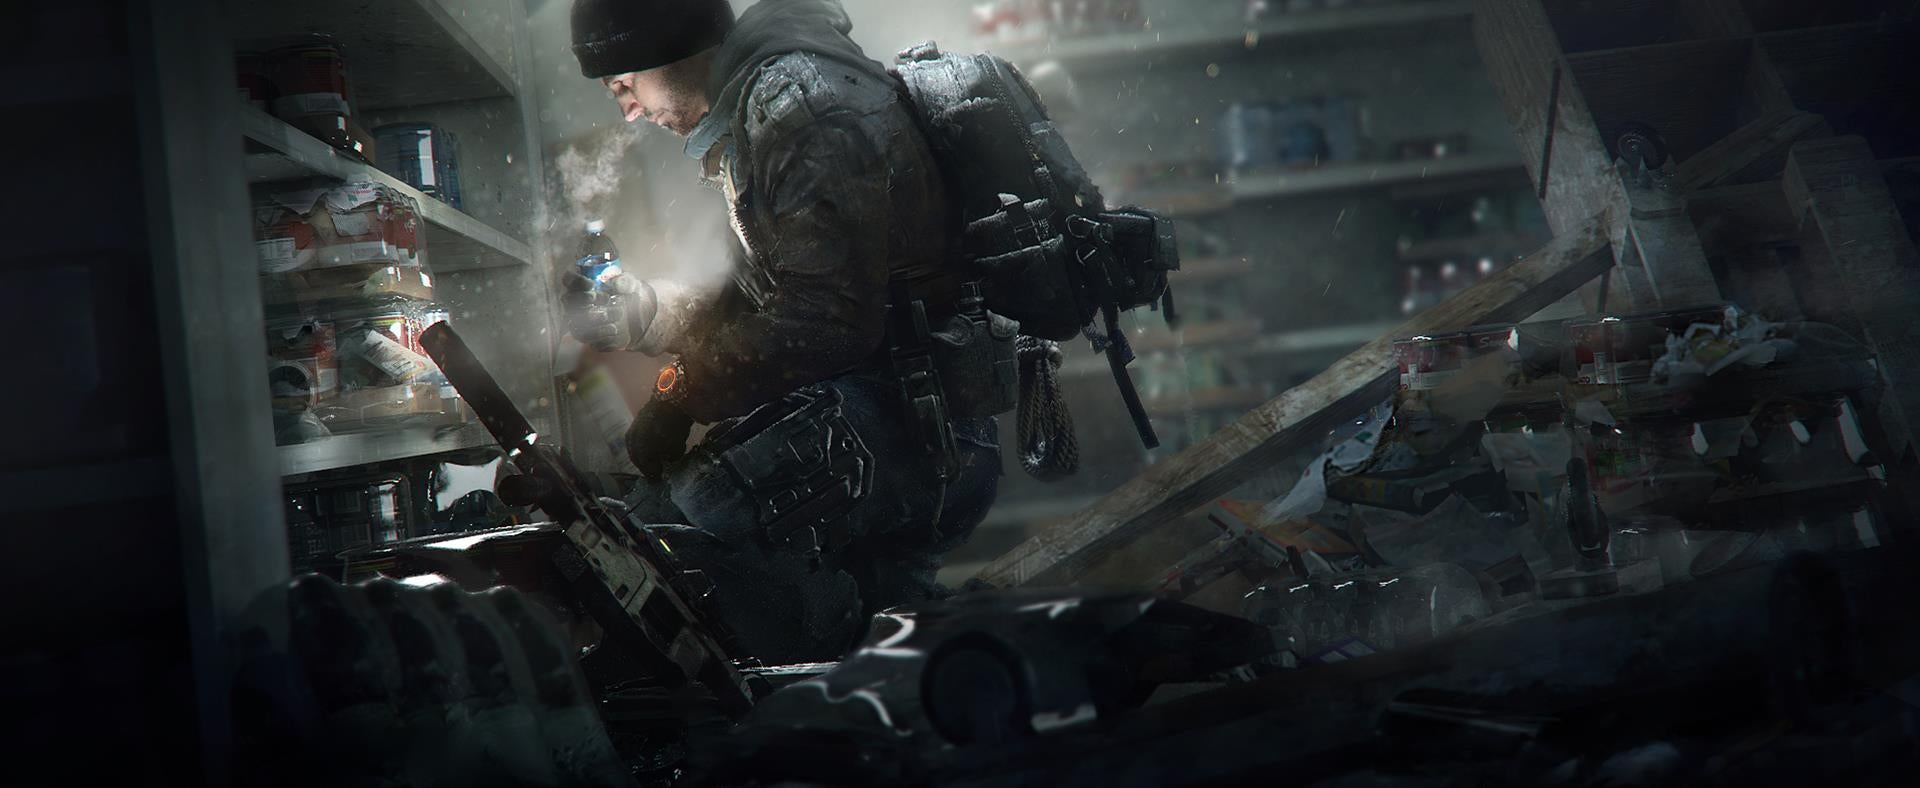 Image for The Division - here's everything we know about Year 2, so far